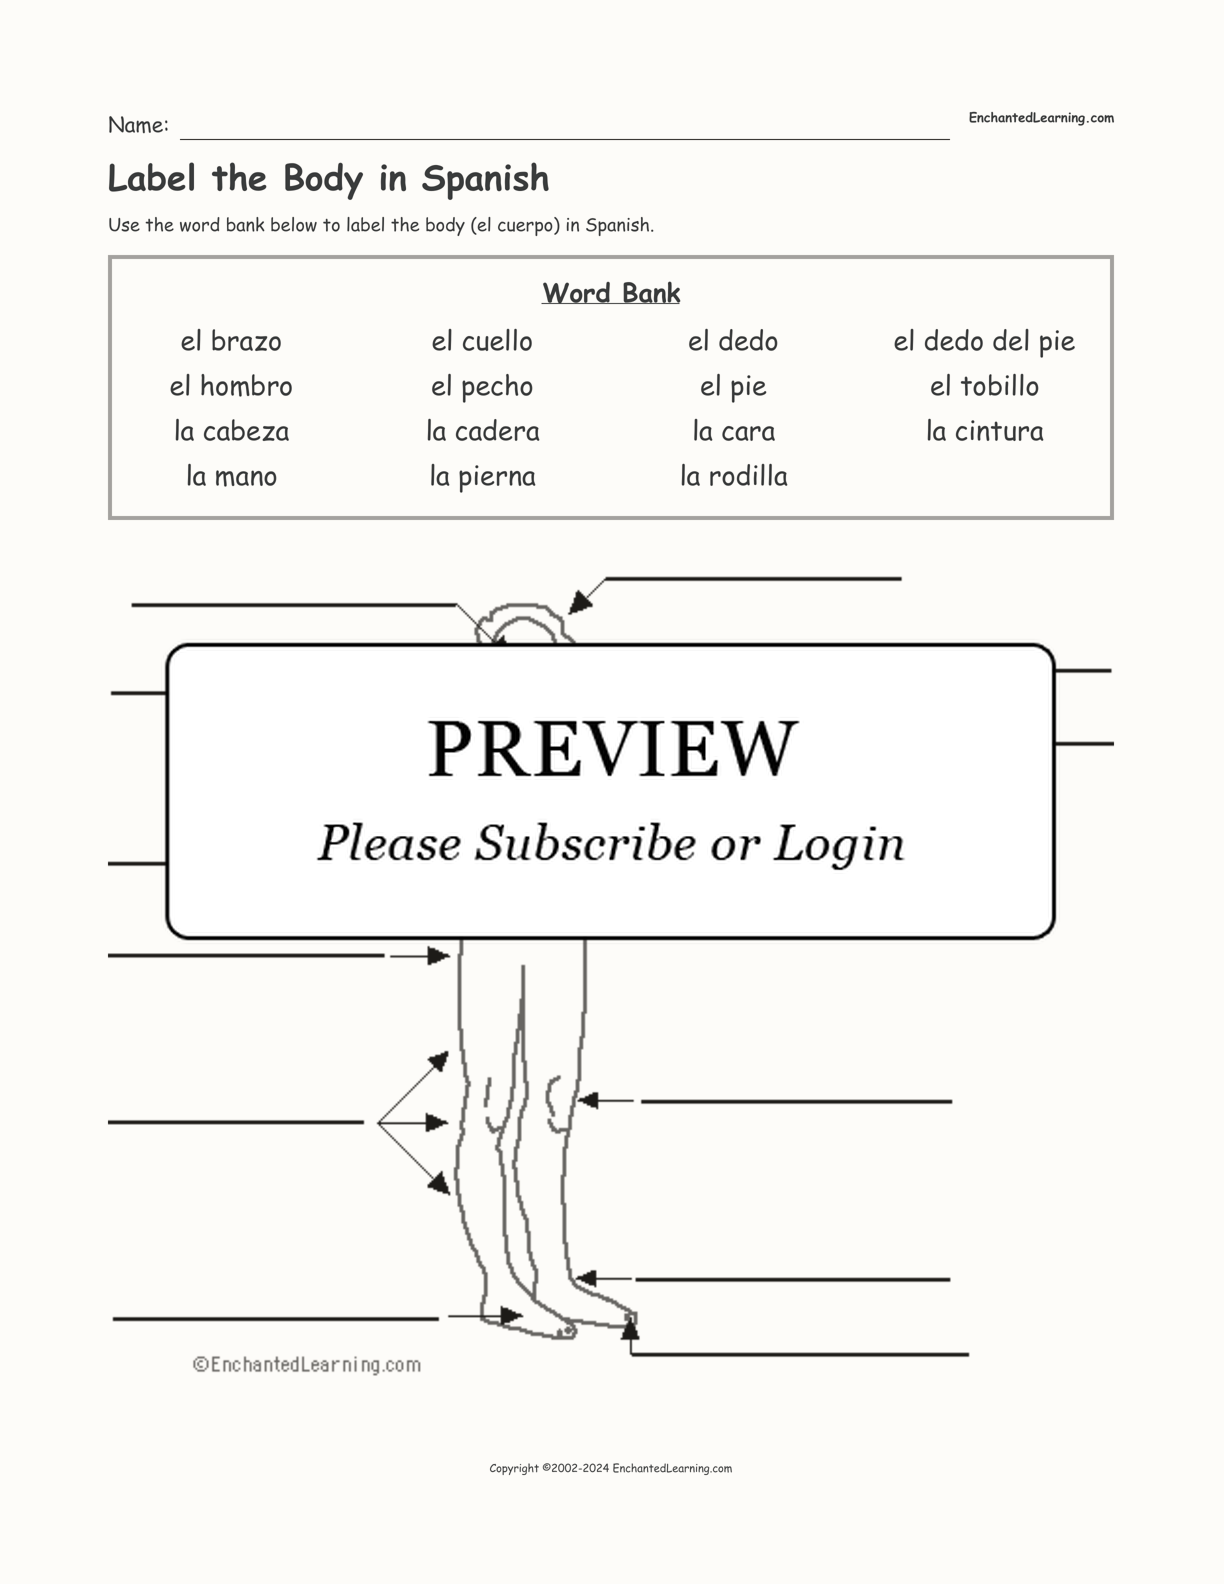 Label the Body in Spanish interactive worksheet page 1